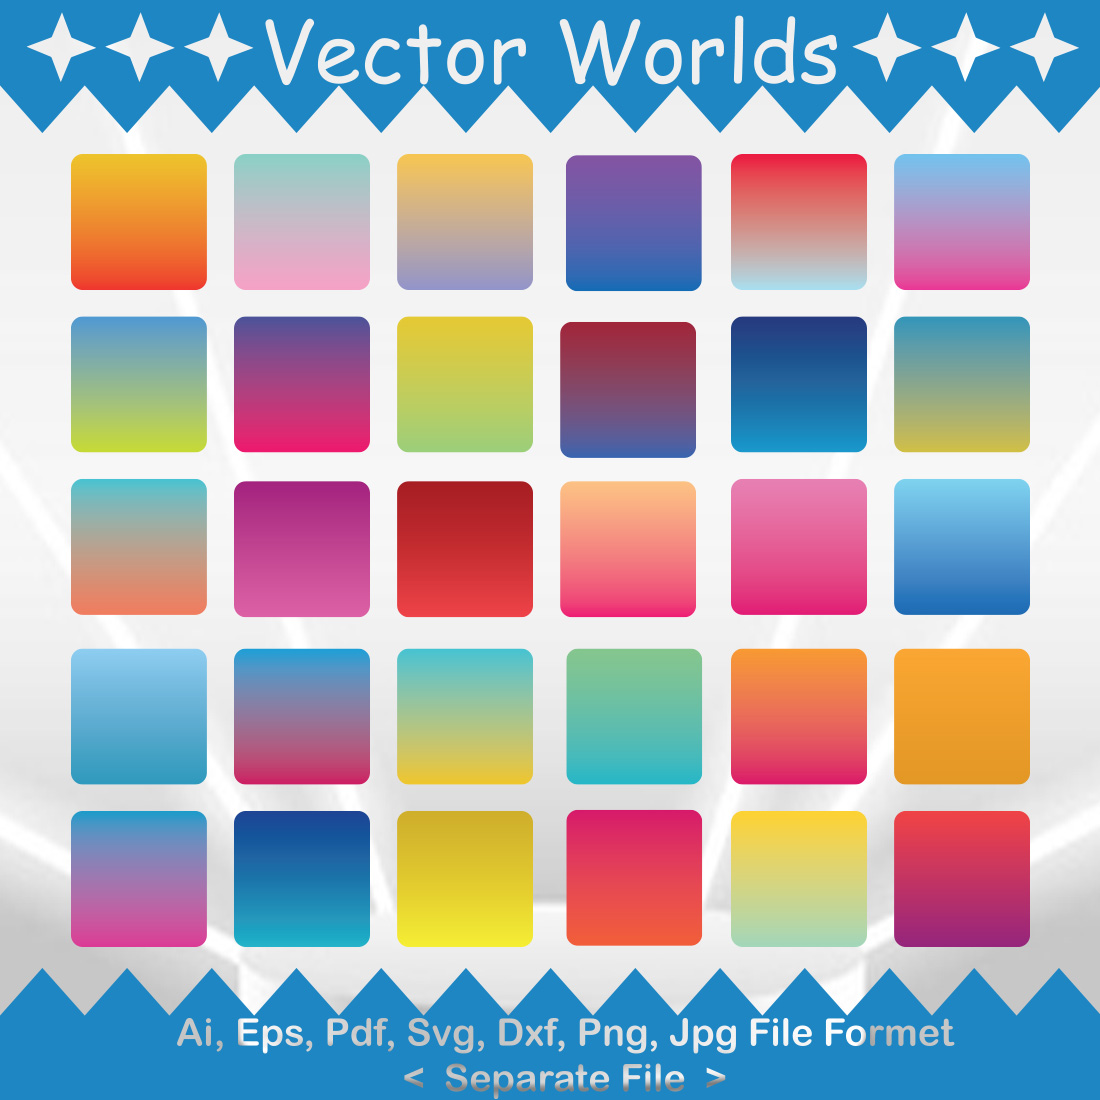 Collection of gorgeous vector image colors